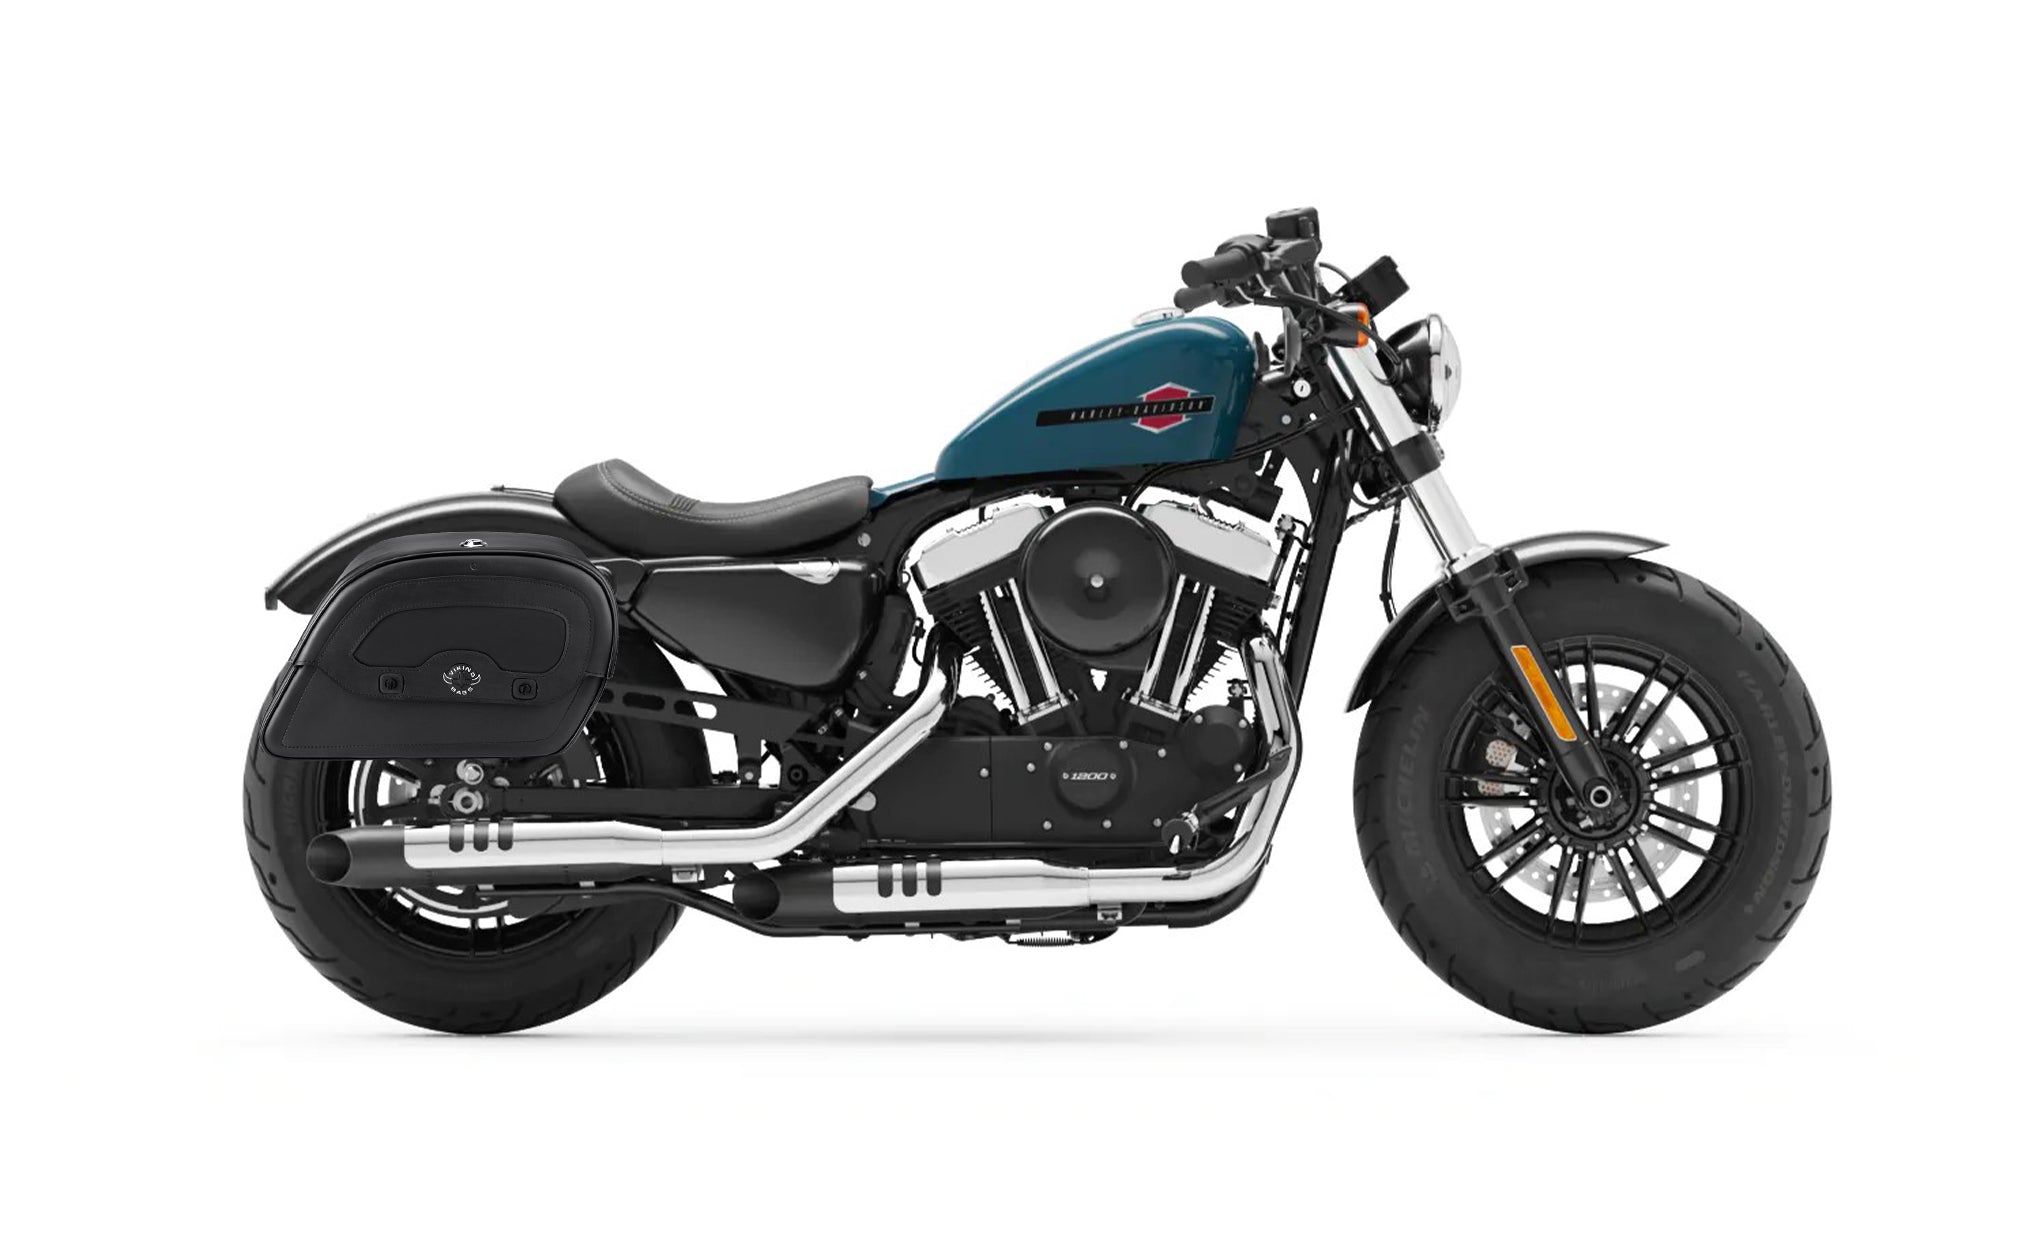 28L - Warrior Medium Quick-Mount Motorcycle Saddlebags For Harley Sportster Forty Eight 48 @expand